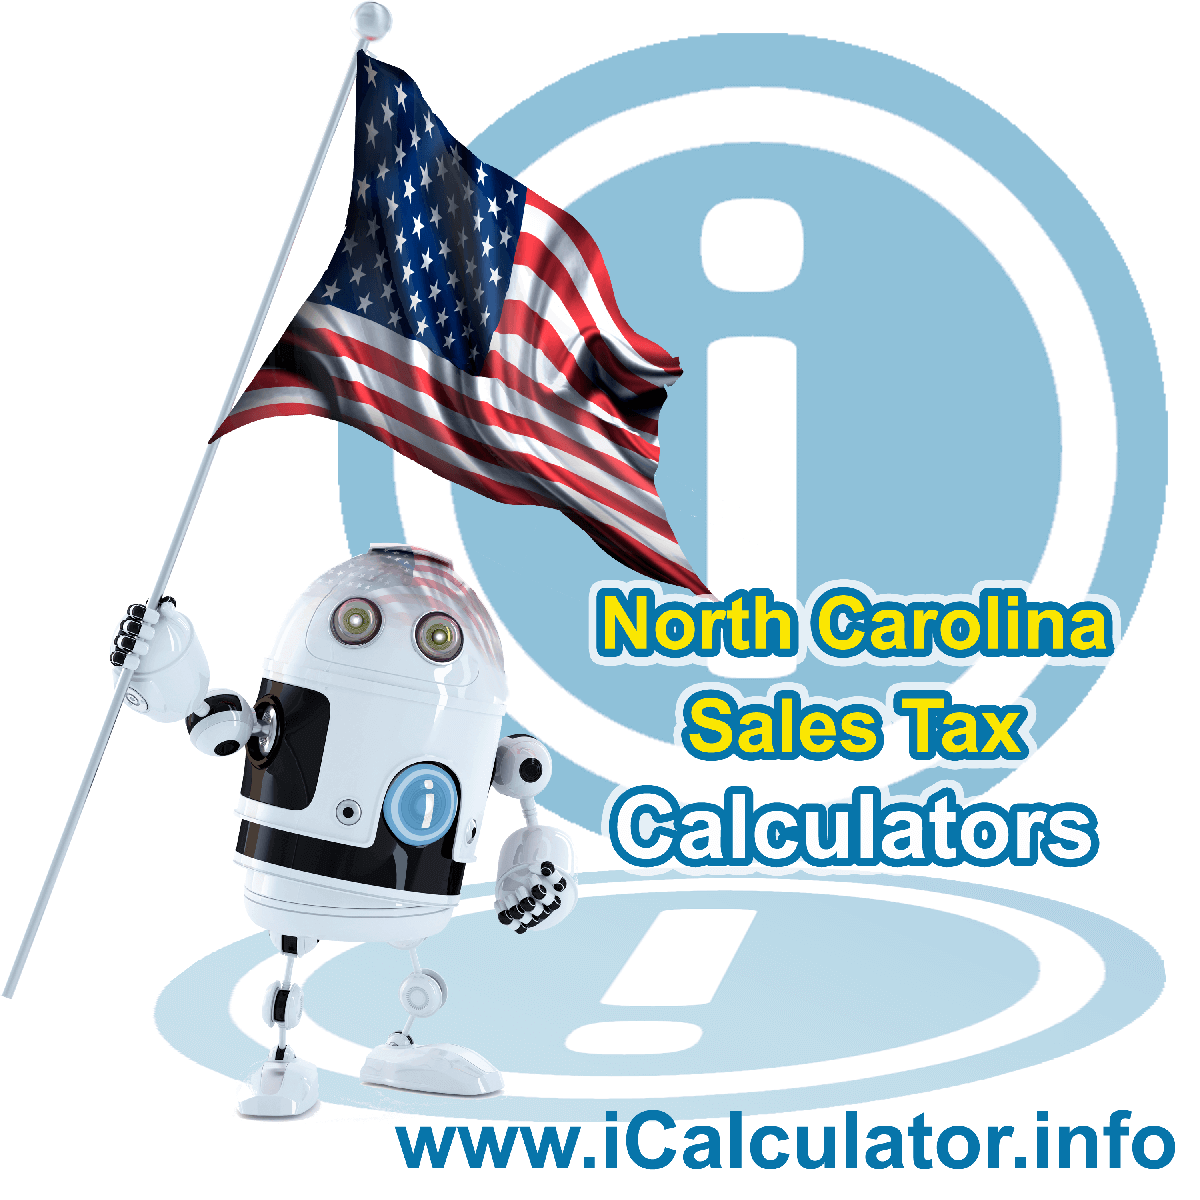 Halifax County Sales Rates: This image illustrates a calculator robot calculating Halifax County sales tax manually using the Halifax County Sales Tax Formula. You can use this information to calculate Halifax County Sales Tax manually or use the Halifax County Sales Tax Calculator to calculate sales tax online.